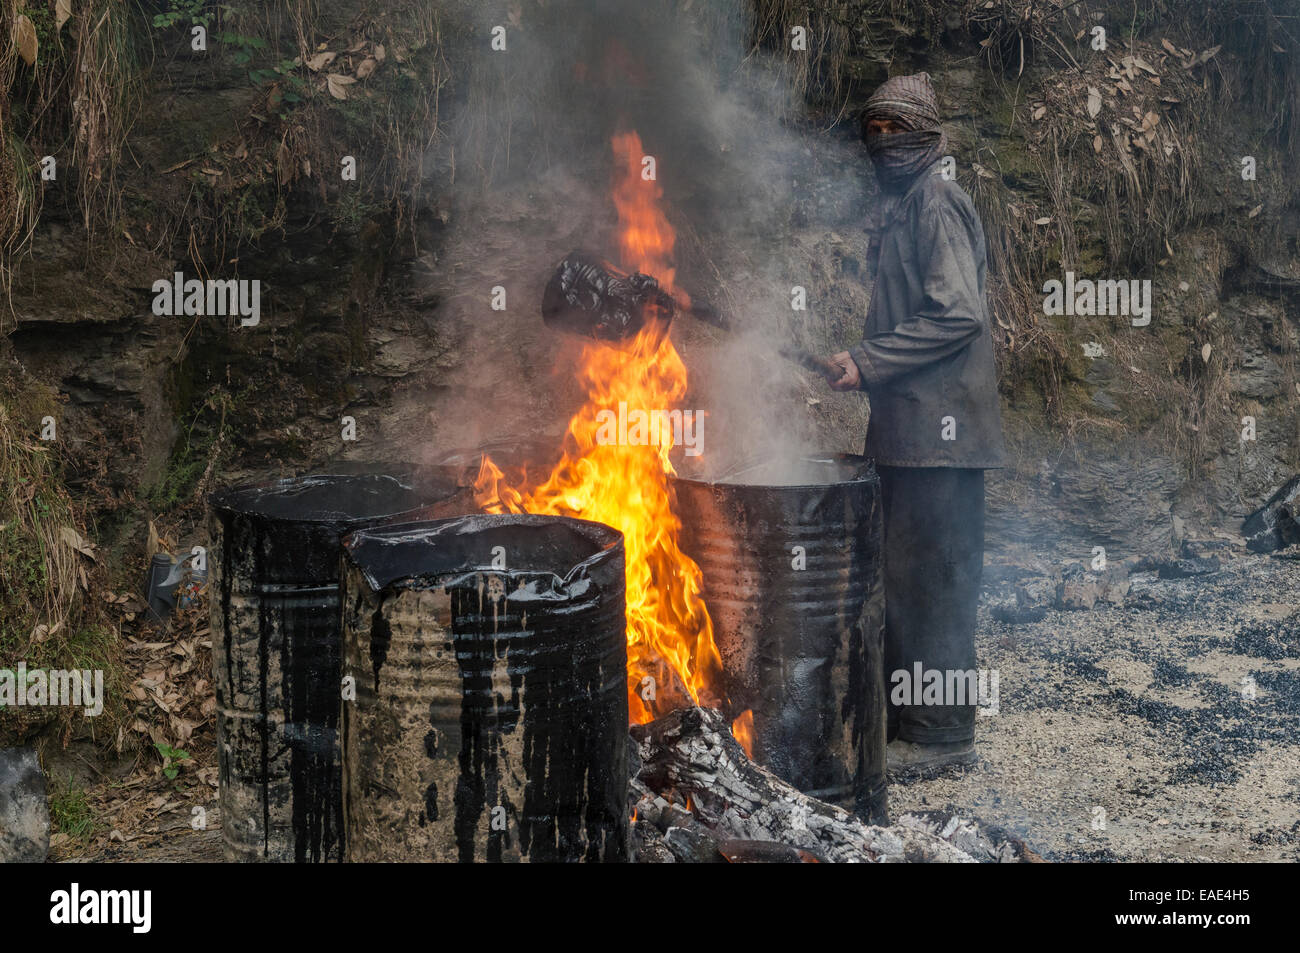 A worker heating tar in barrels with an open fire at a road construction site, Shimla, Himachal Pradesh, India Stock Photo